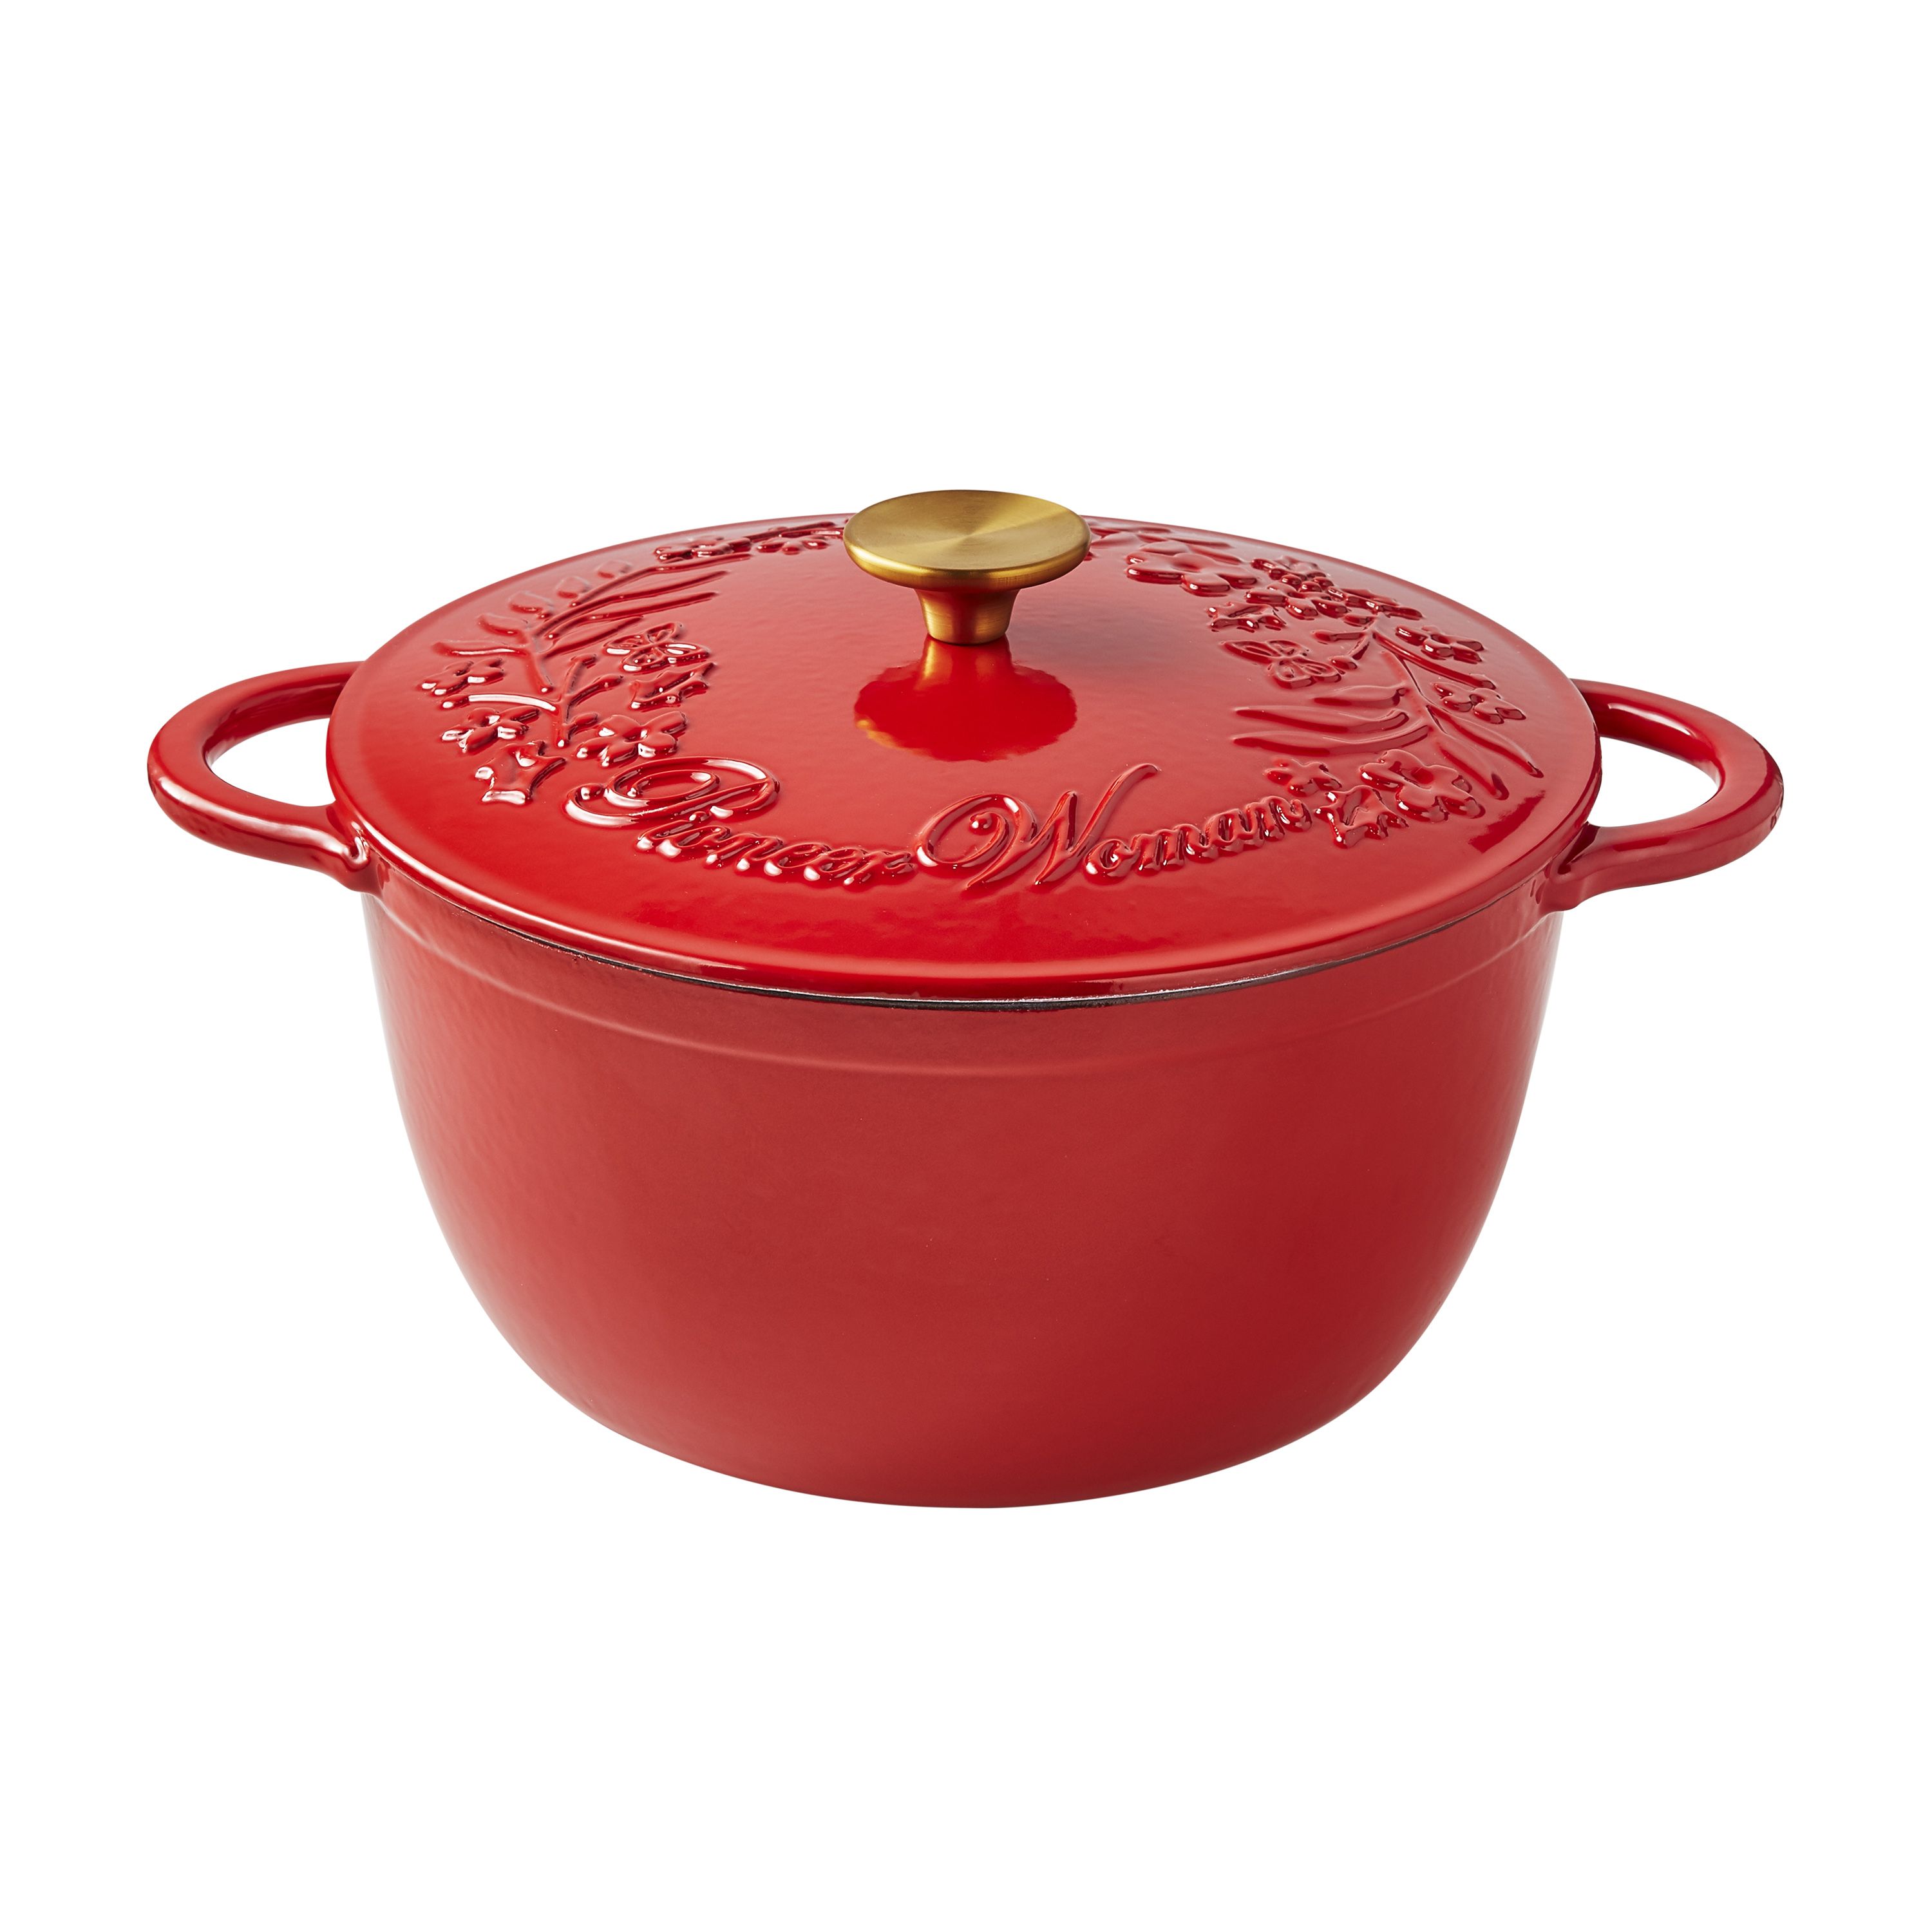 The Pioneer Woman Timeless Beauty Holiday Dutch Oven